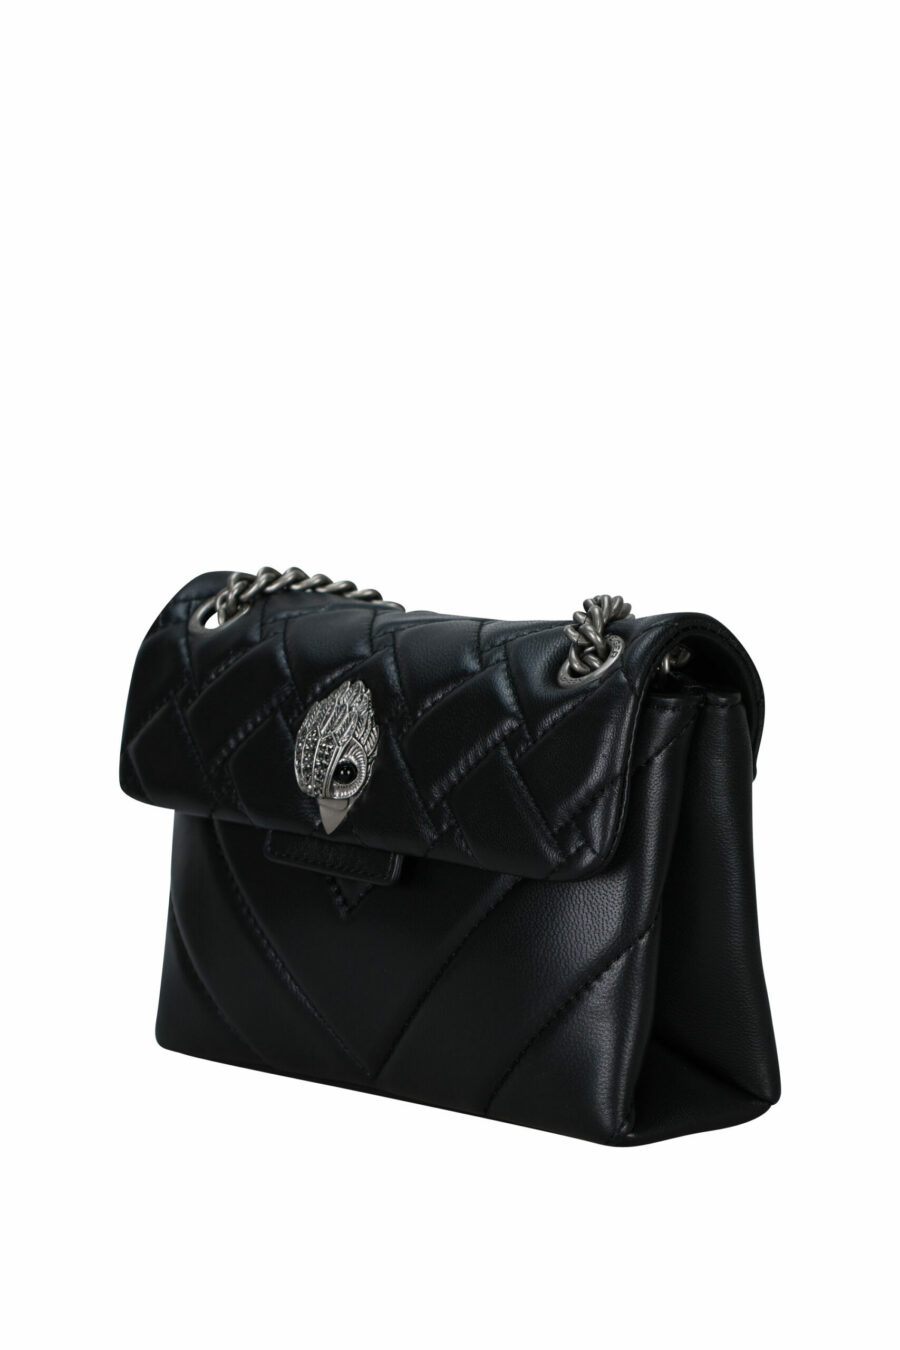 Mini black quilted shoulder bag with silver eagle logo with black crystals - 5045065997525 1 scaled